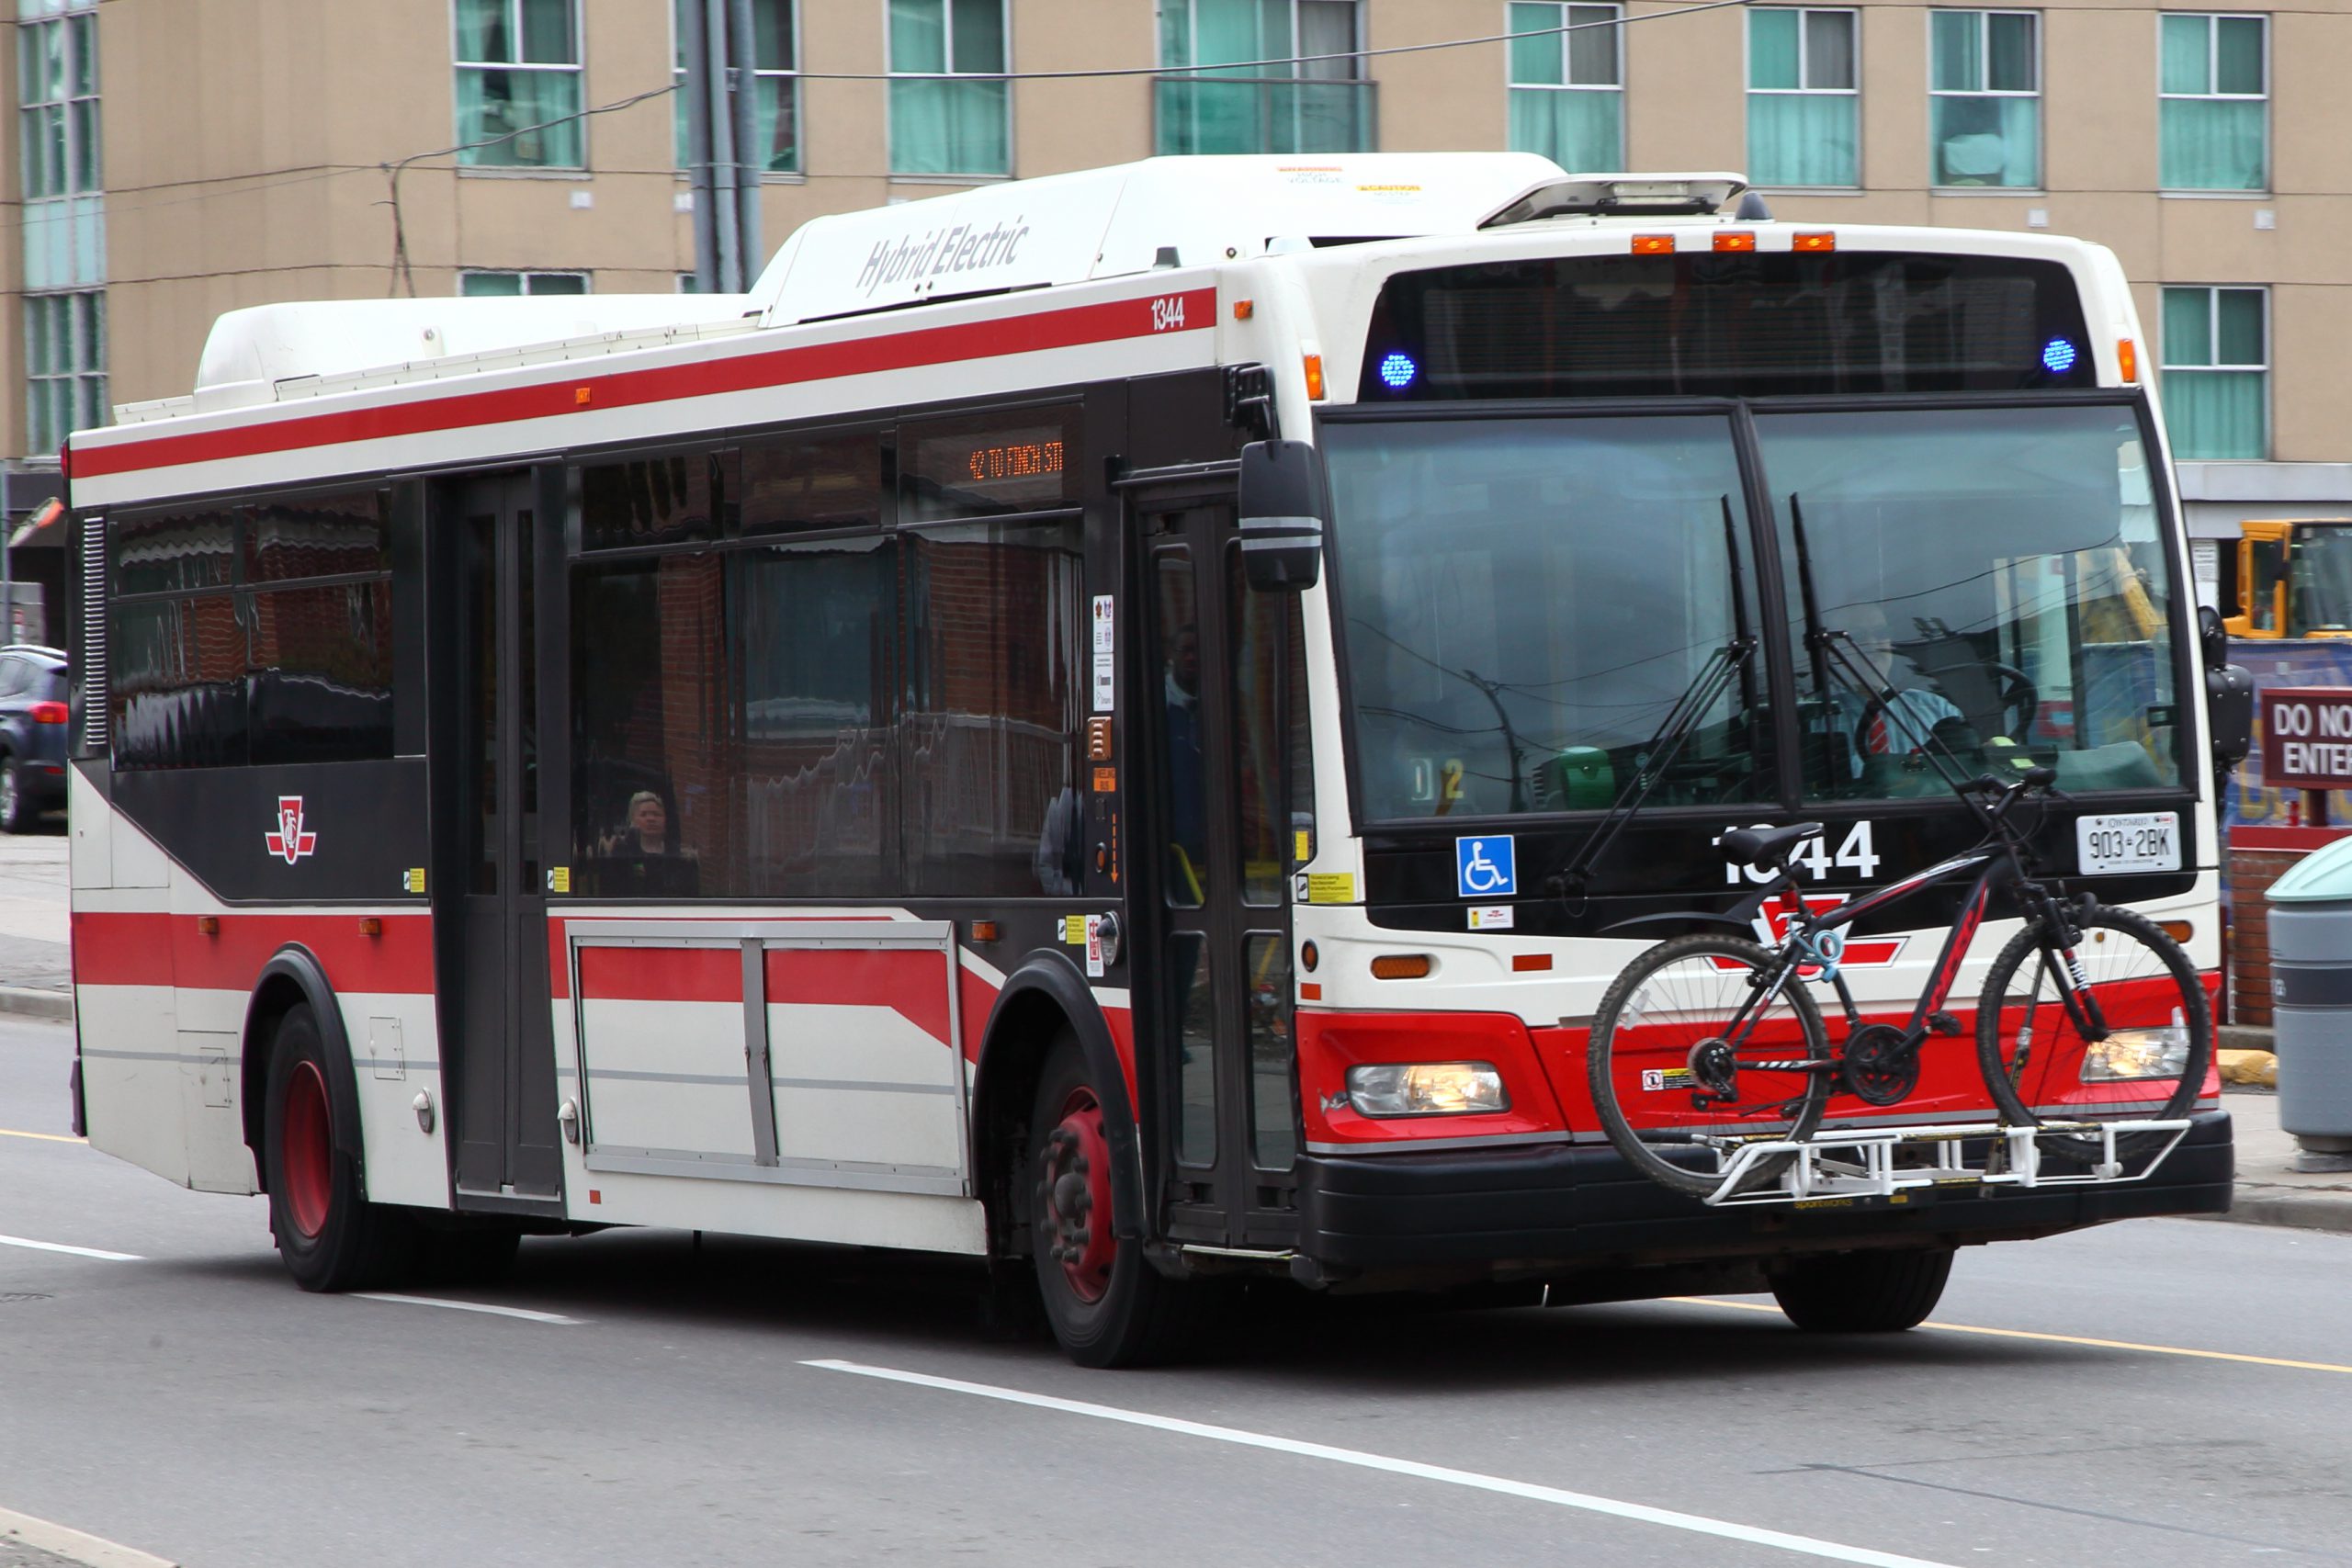 A bike rack on the front of a Toronto bus.